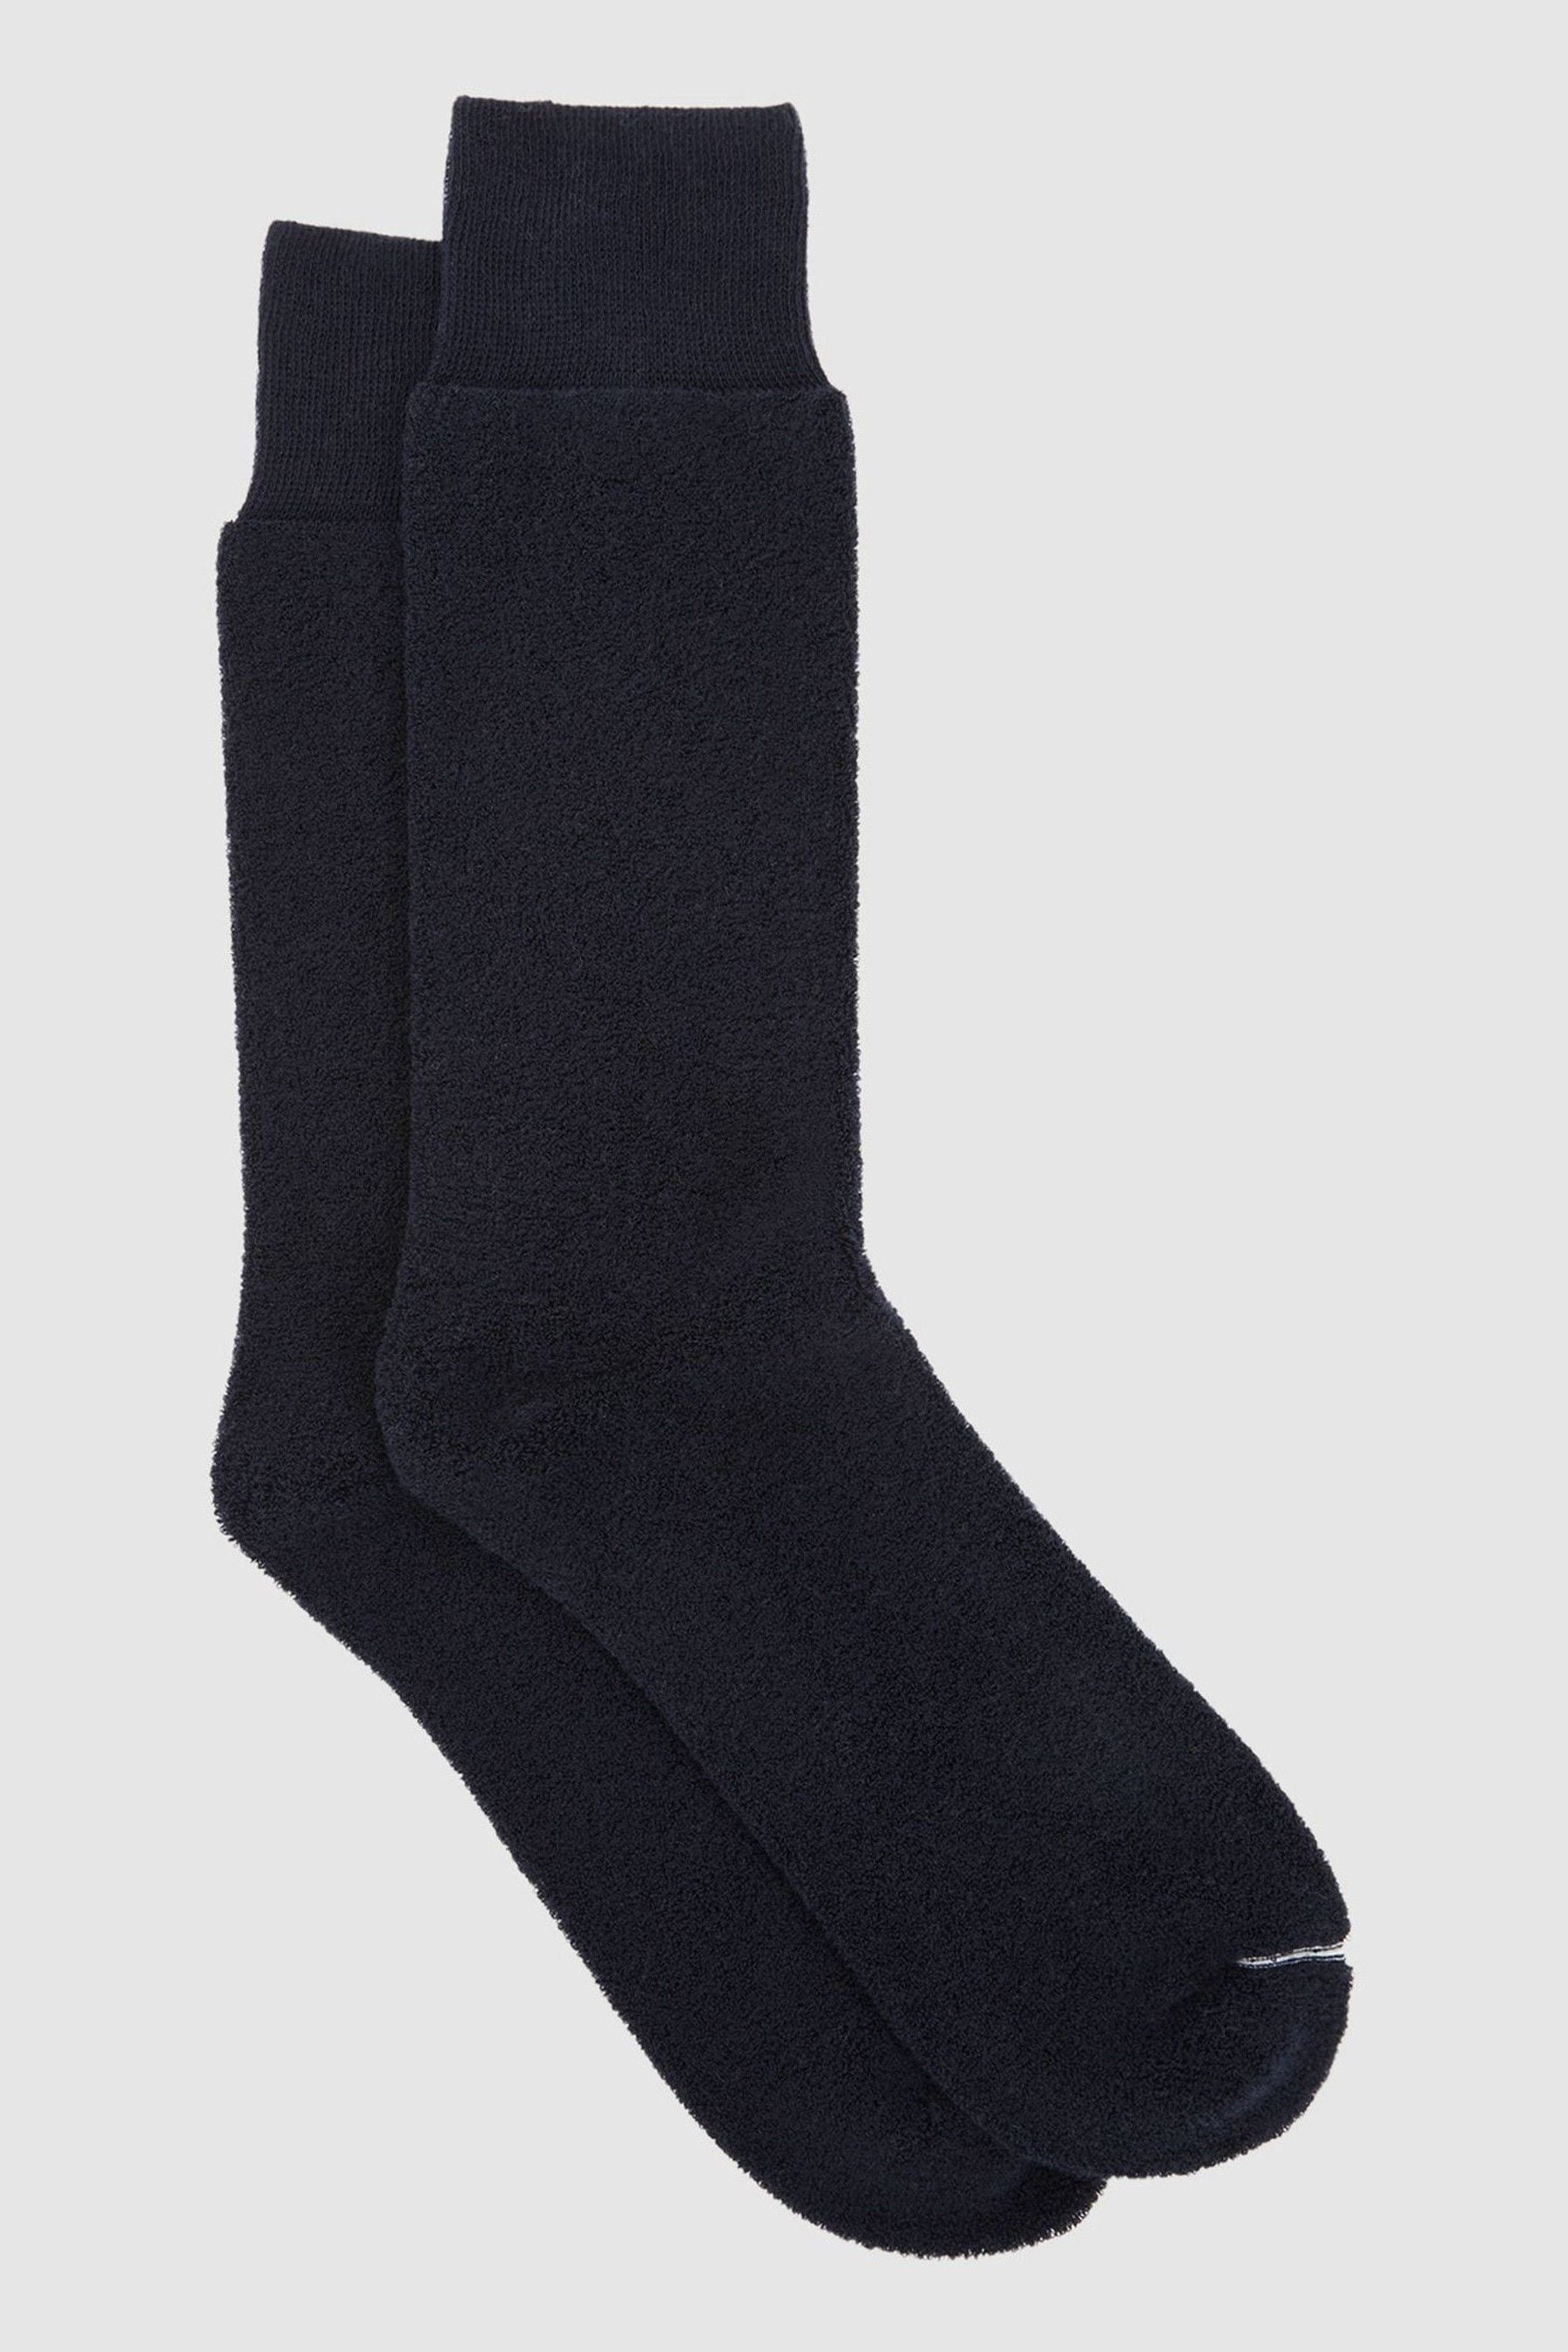 Reiss Alers - Navy Cotton Blend Terry Towelling Socks, S/m